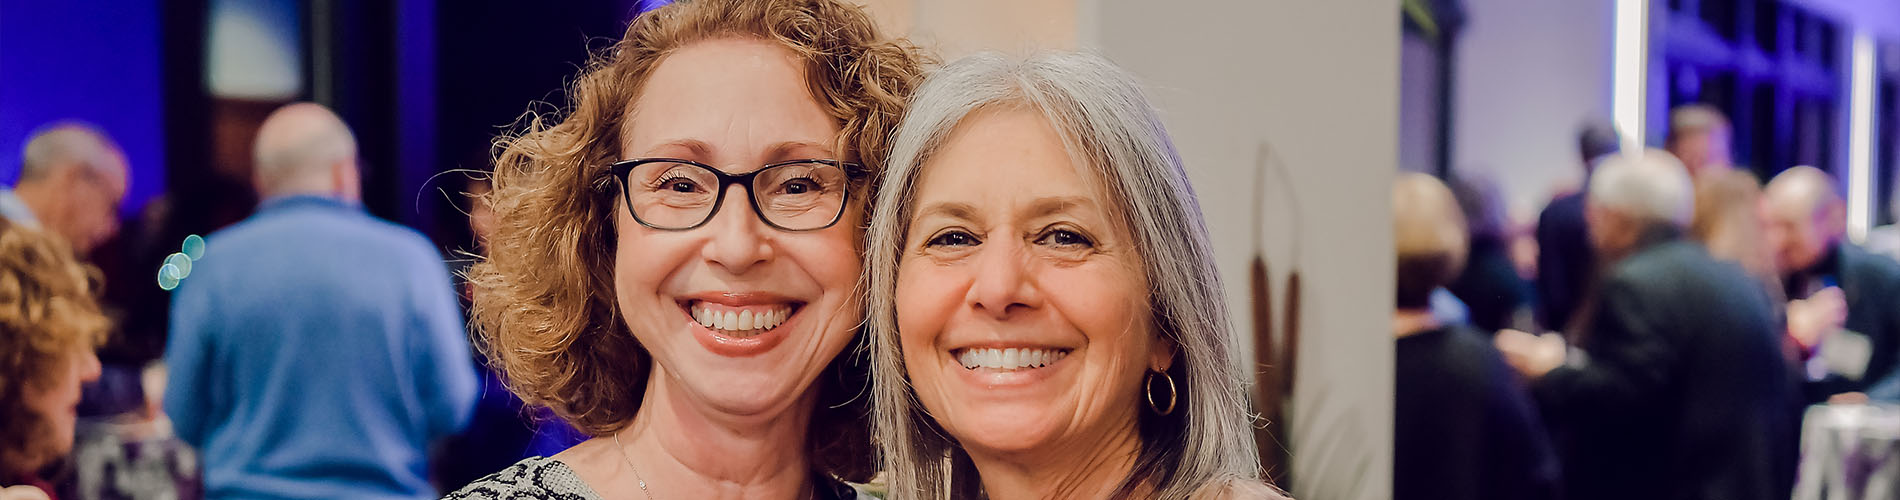 Two smiling women attending Associated event